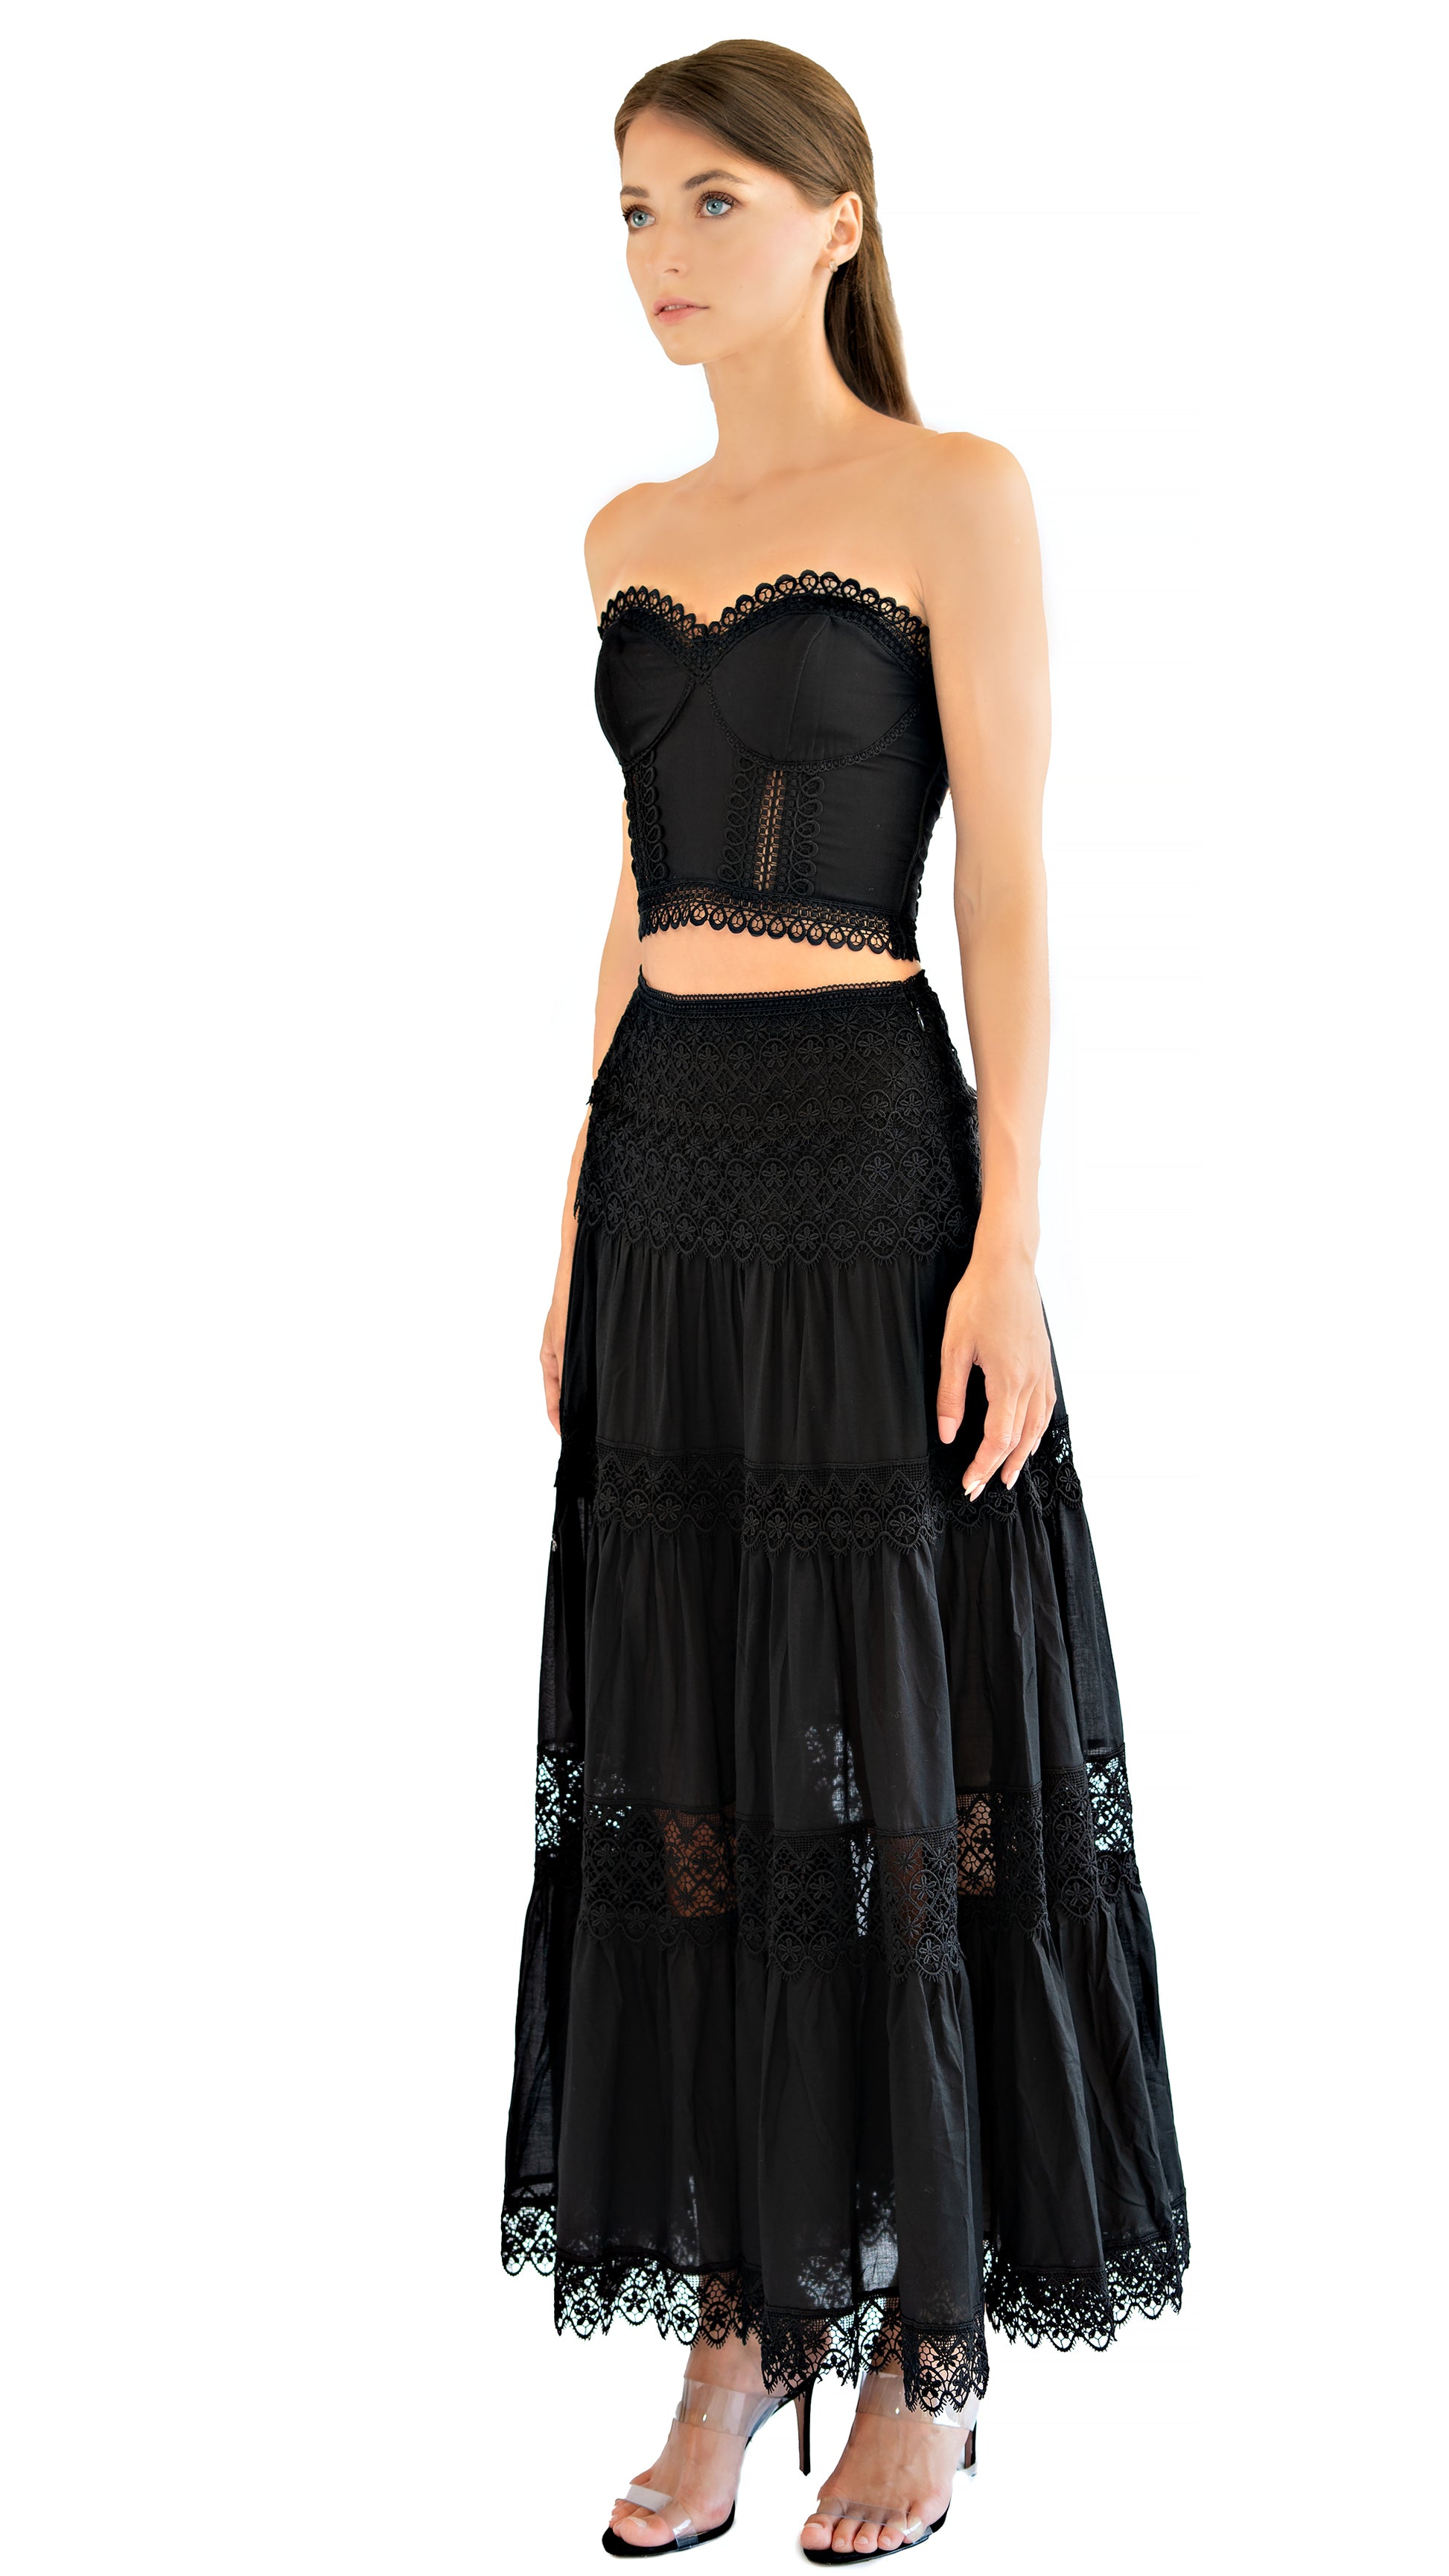 Charo Ruiz Lys strapless bustier with lace in black